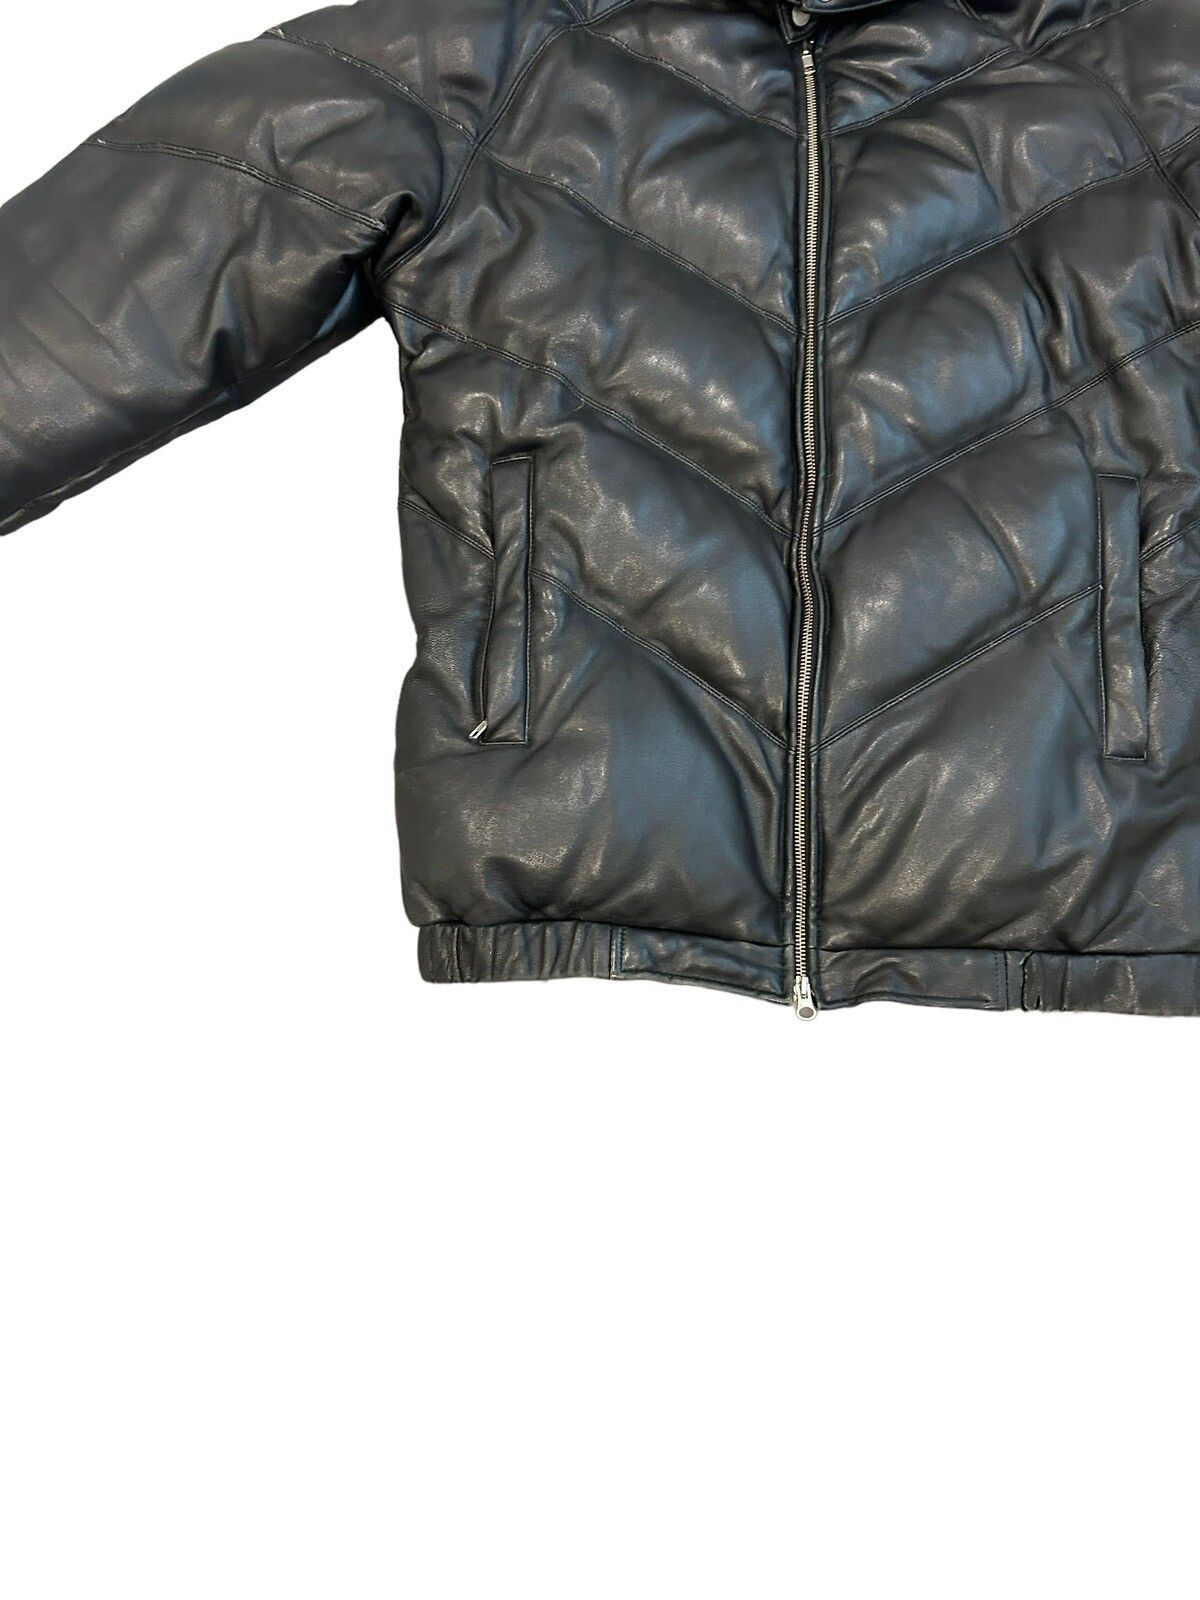 Supreme LEATHER DIWN JACKET / PUFFER Size US M / EU 48-50 / 2 - 2 Preview